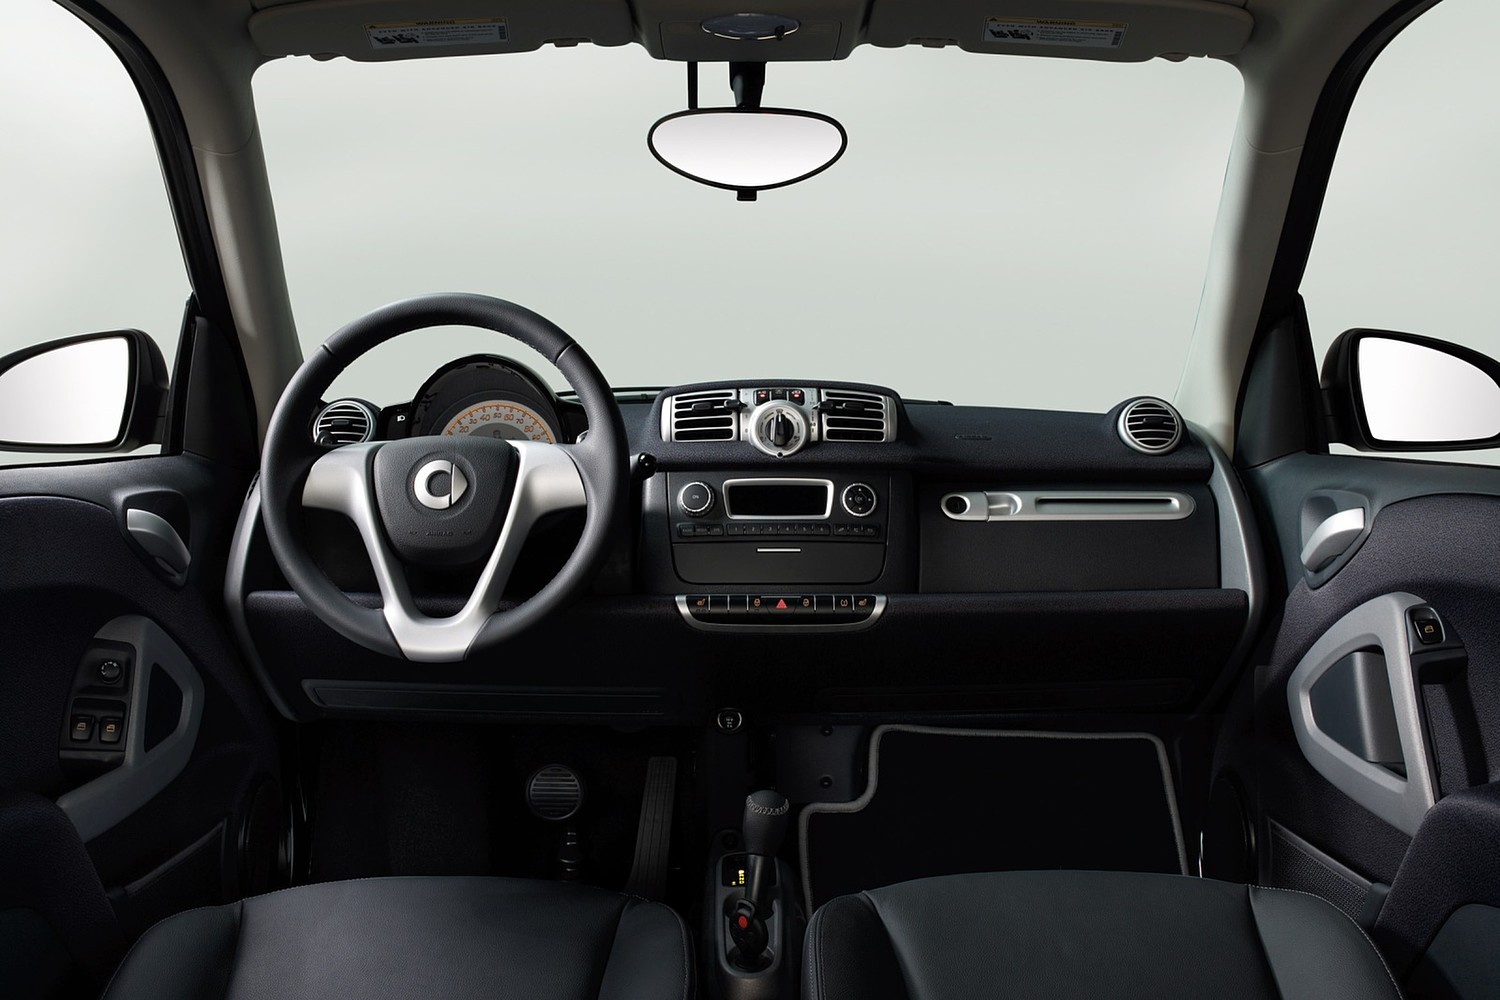 smart fortwo passion coupe 2dr Hatchback Dashboard (2013 model year shown)